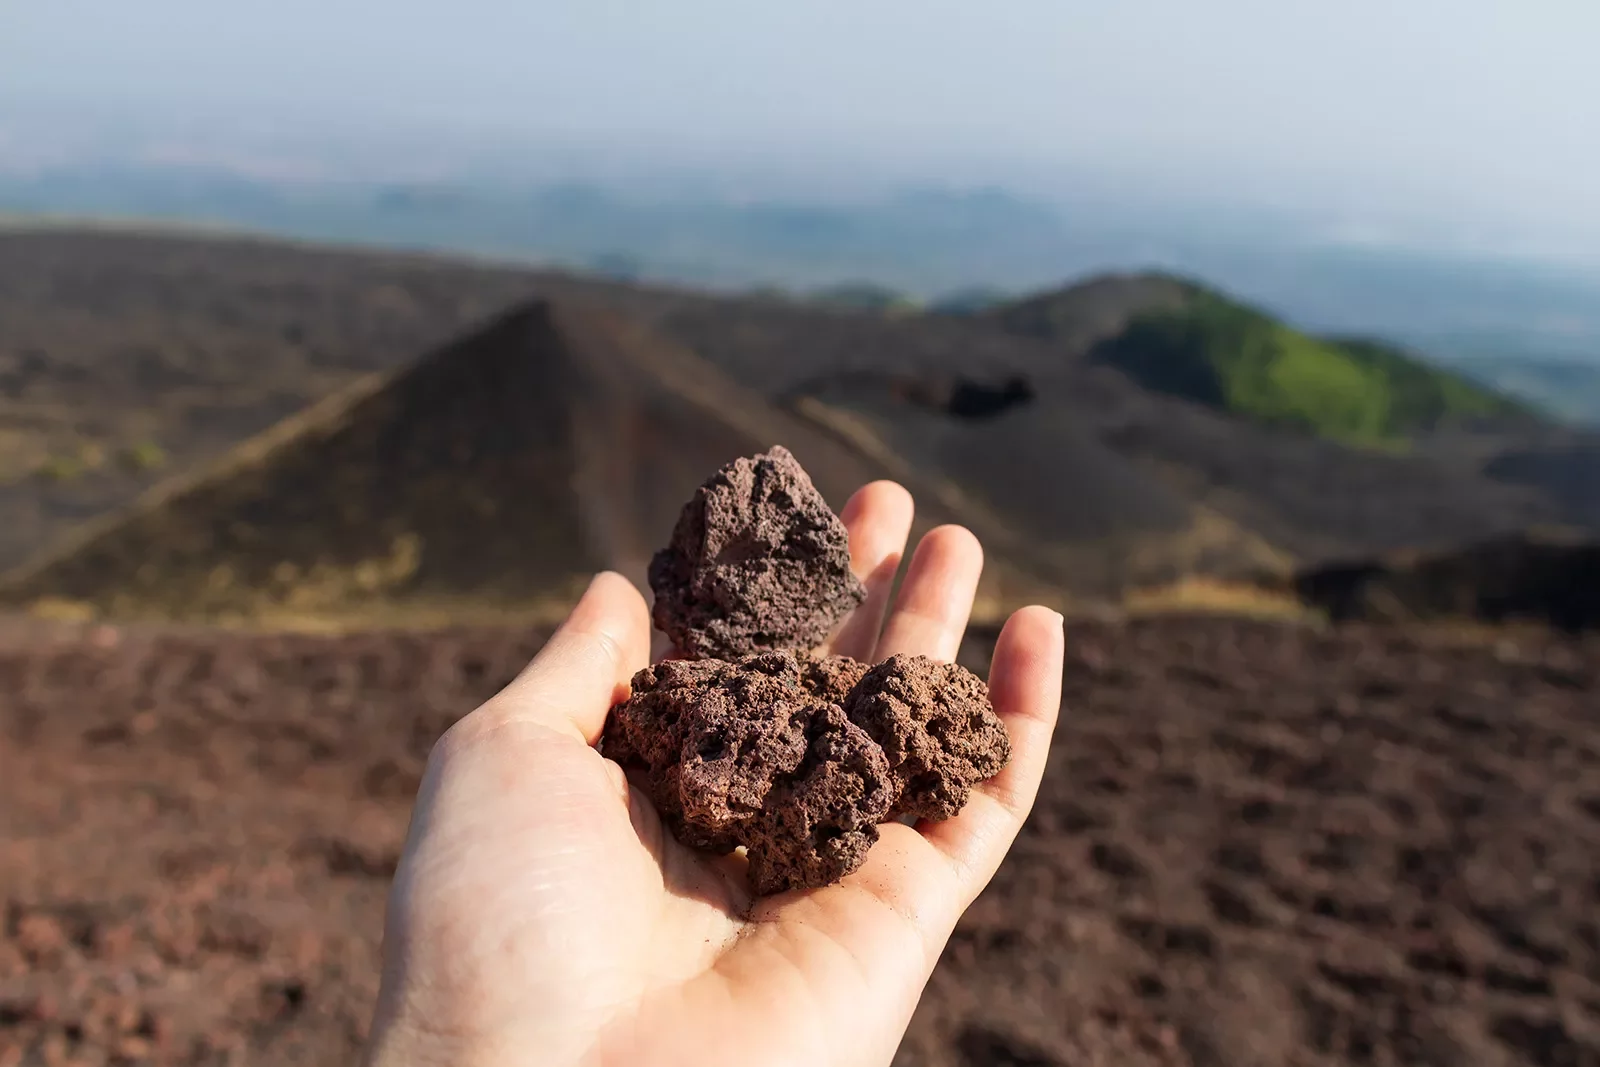 Point of view shot of volcanic rock landscape, hand holding volcanic rocks.